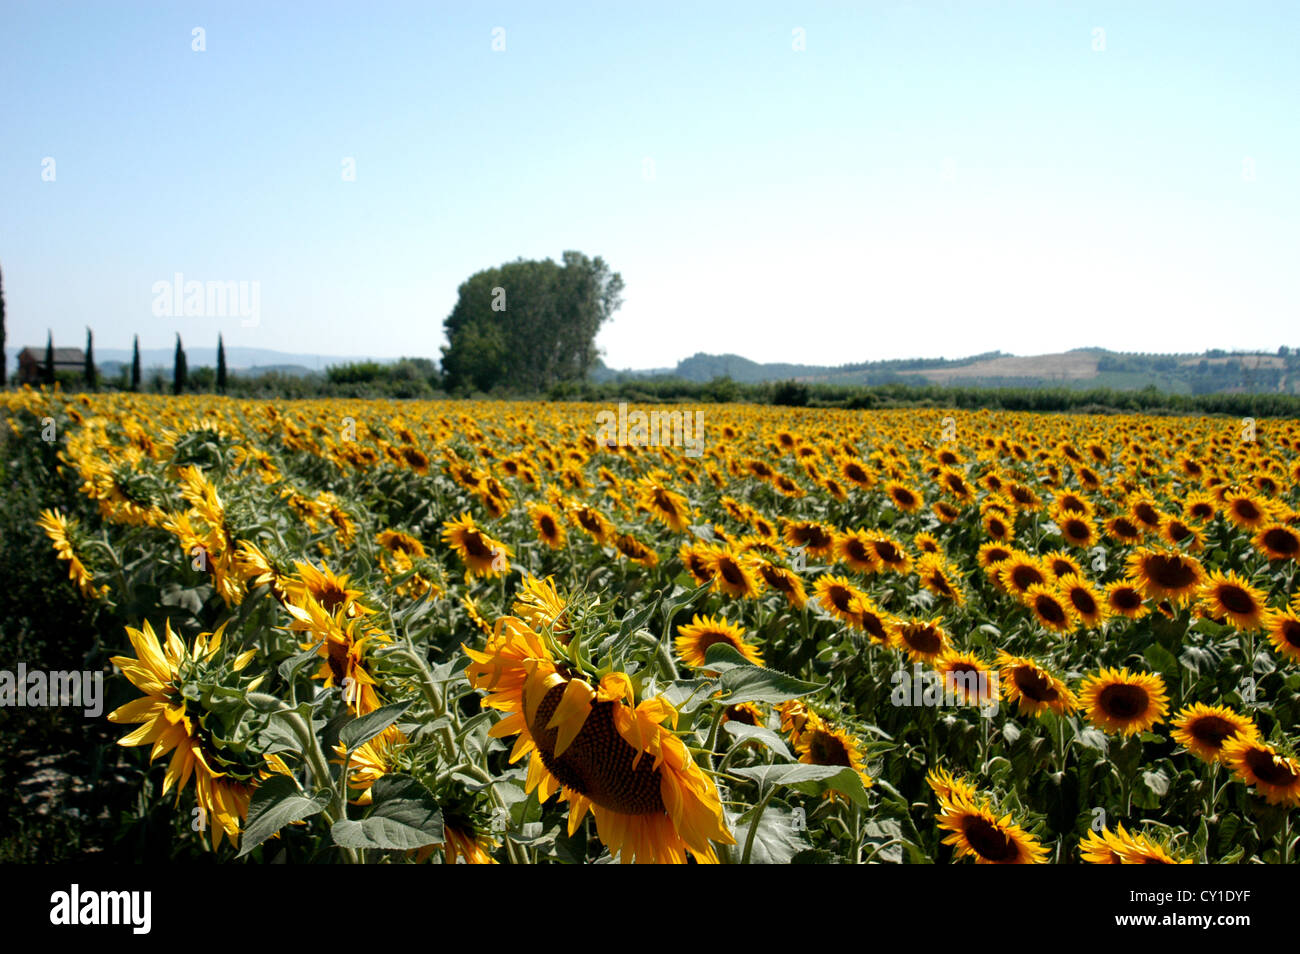 Sunflowers in a field Stock Photo